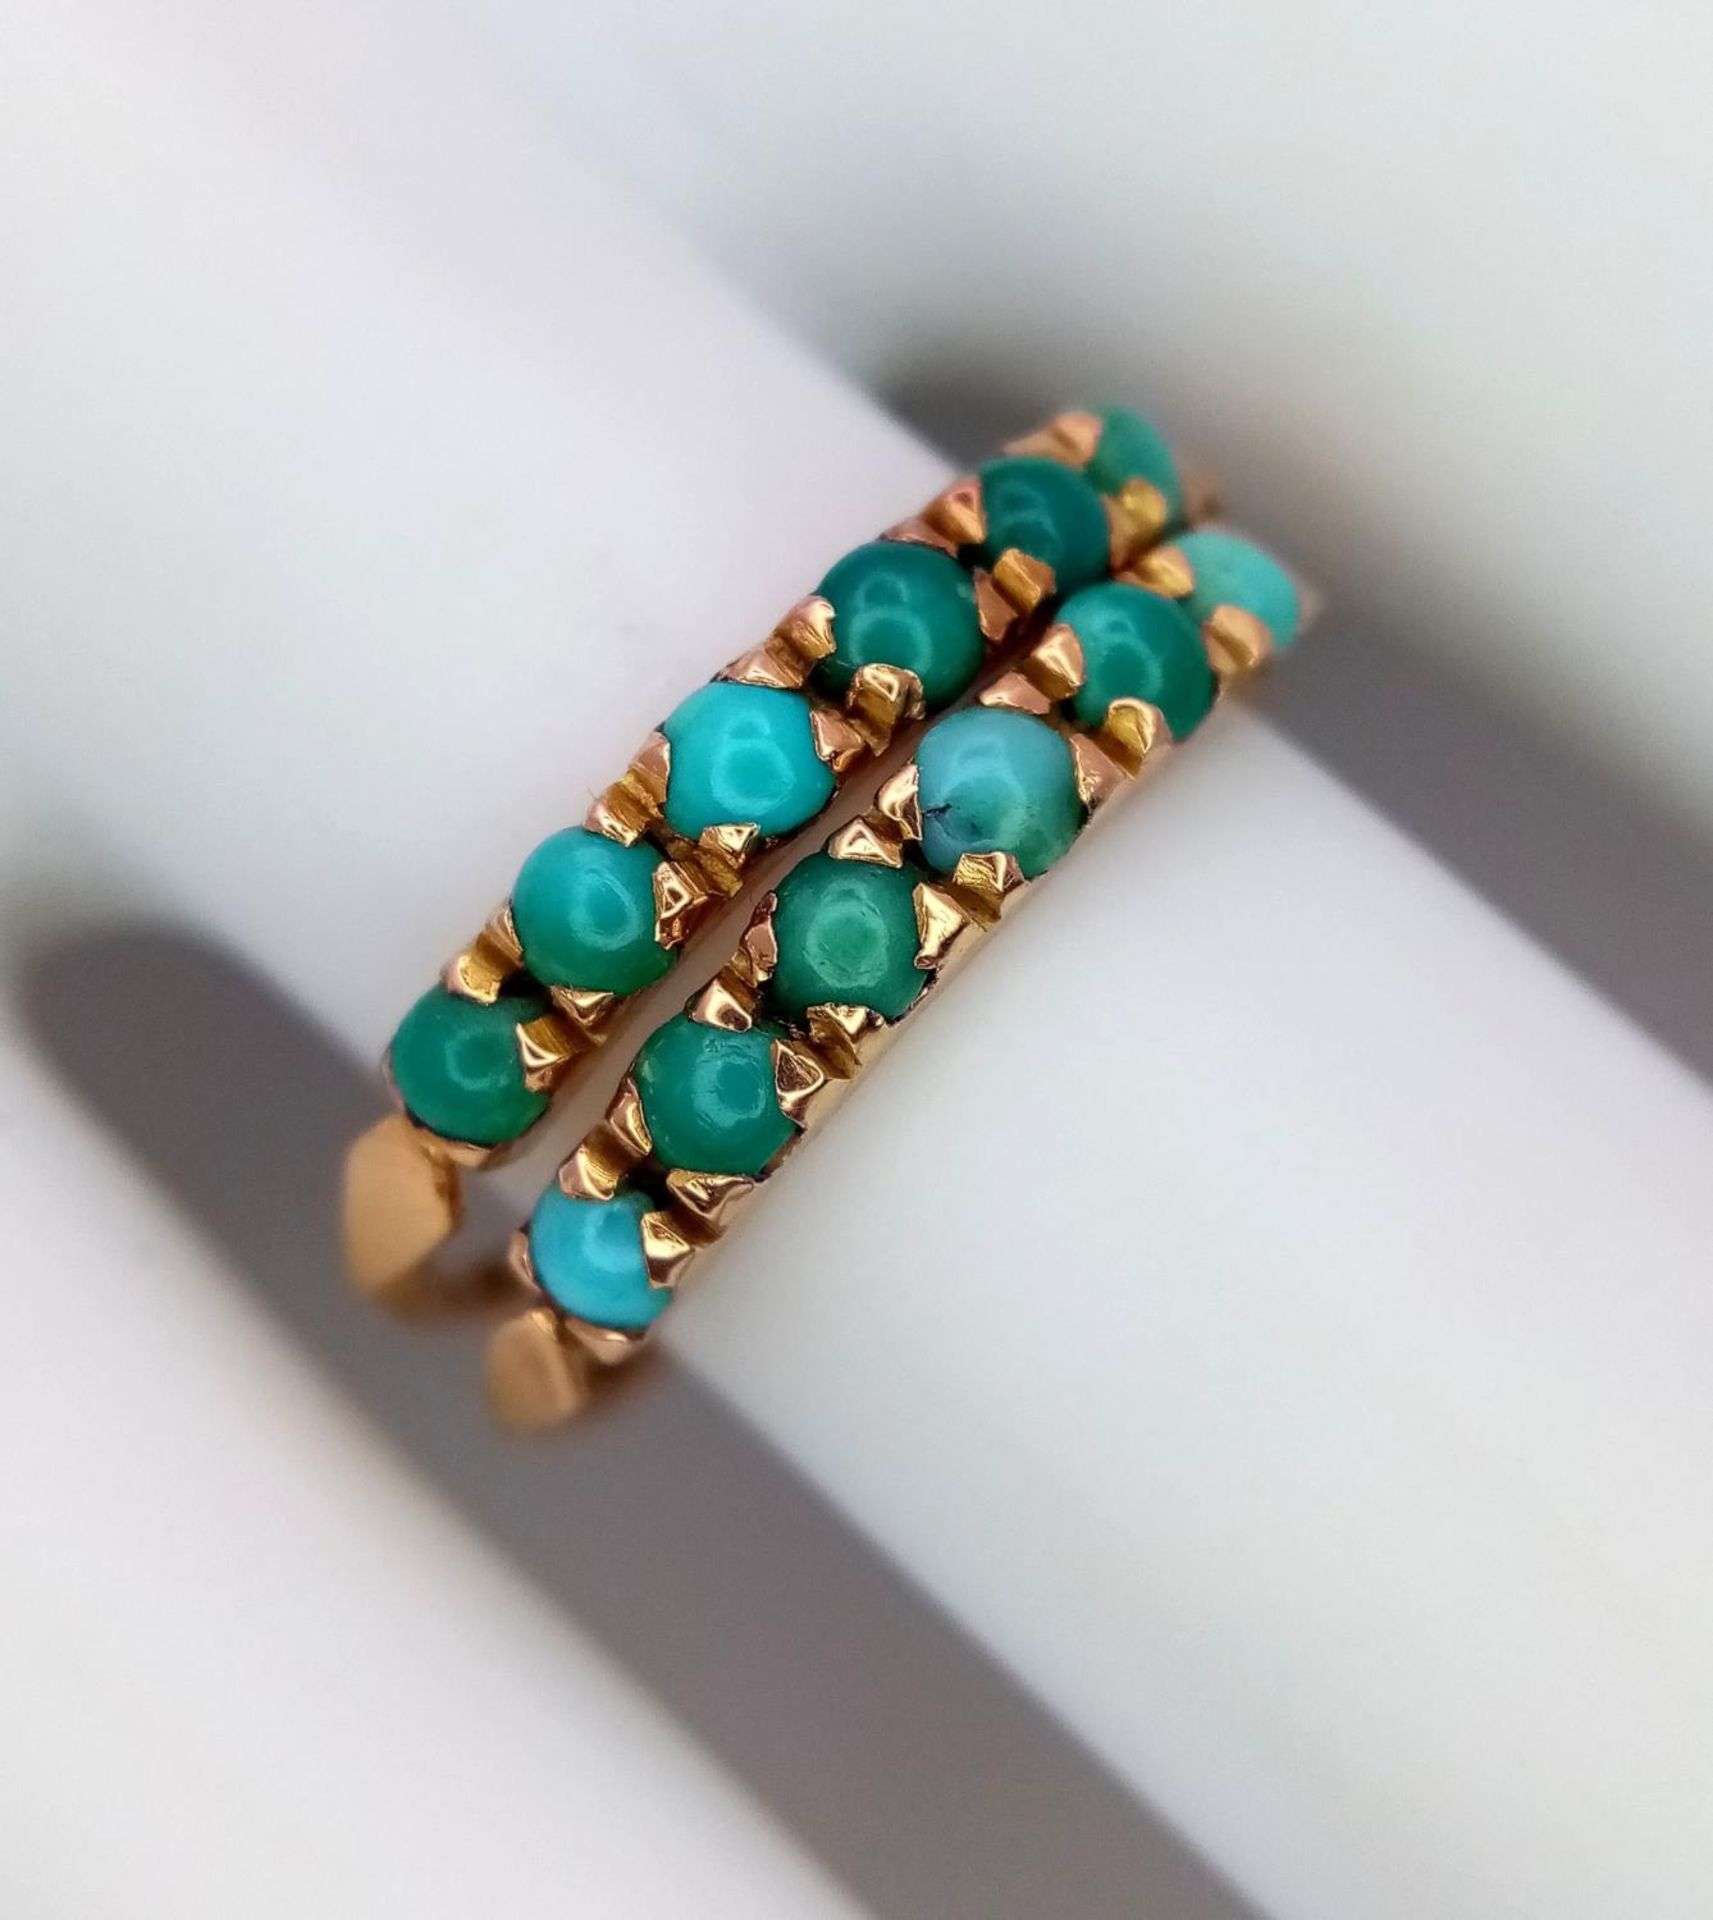 A 14ct Yellow Gold (tested as) Turquoise Stacking Ring, size L, 2.6g total weight. ref: 1513I